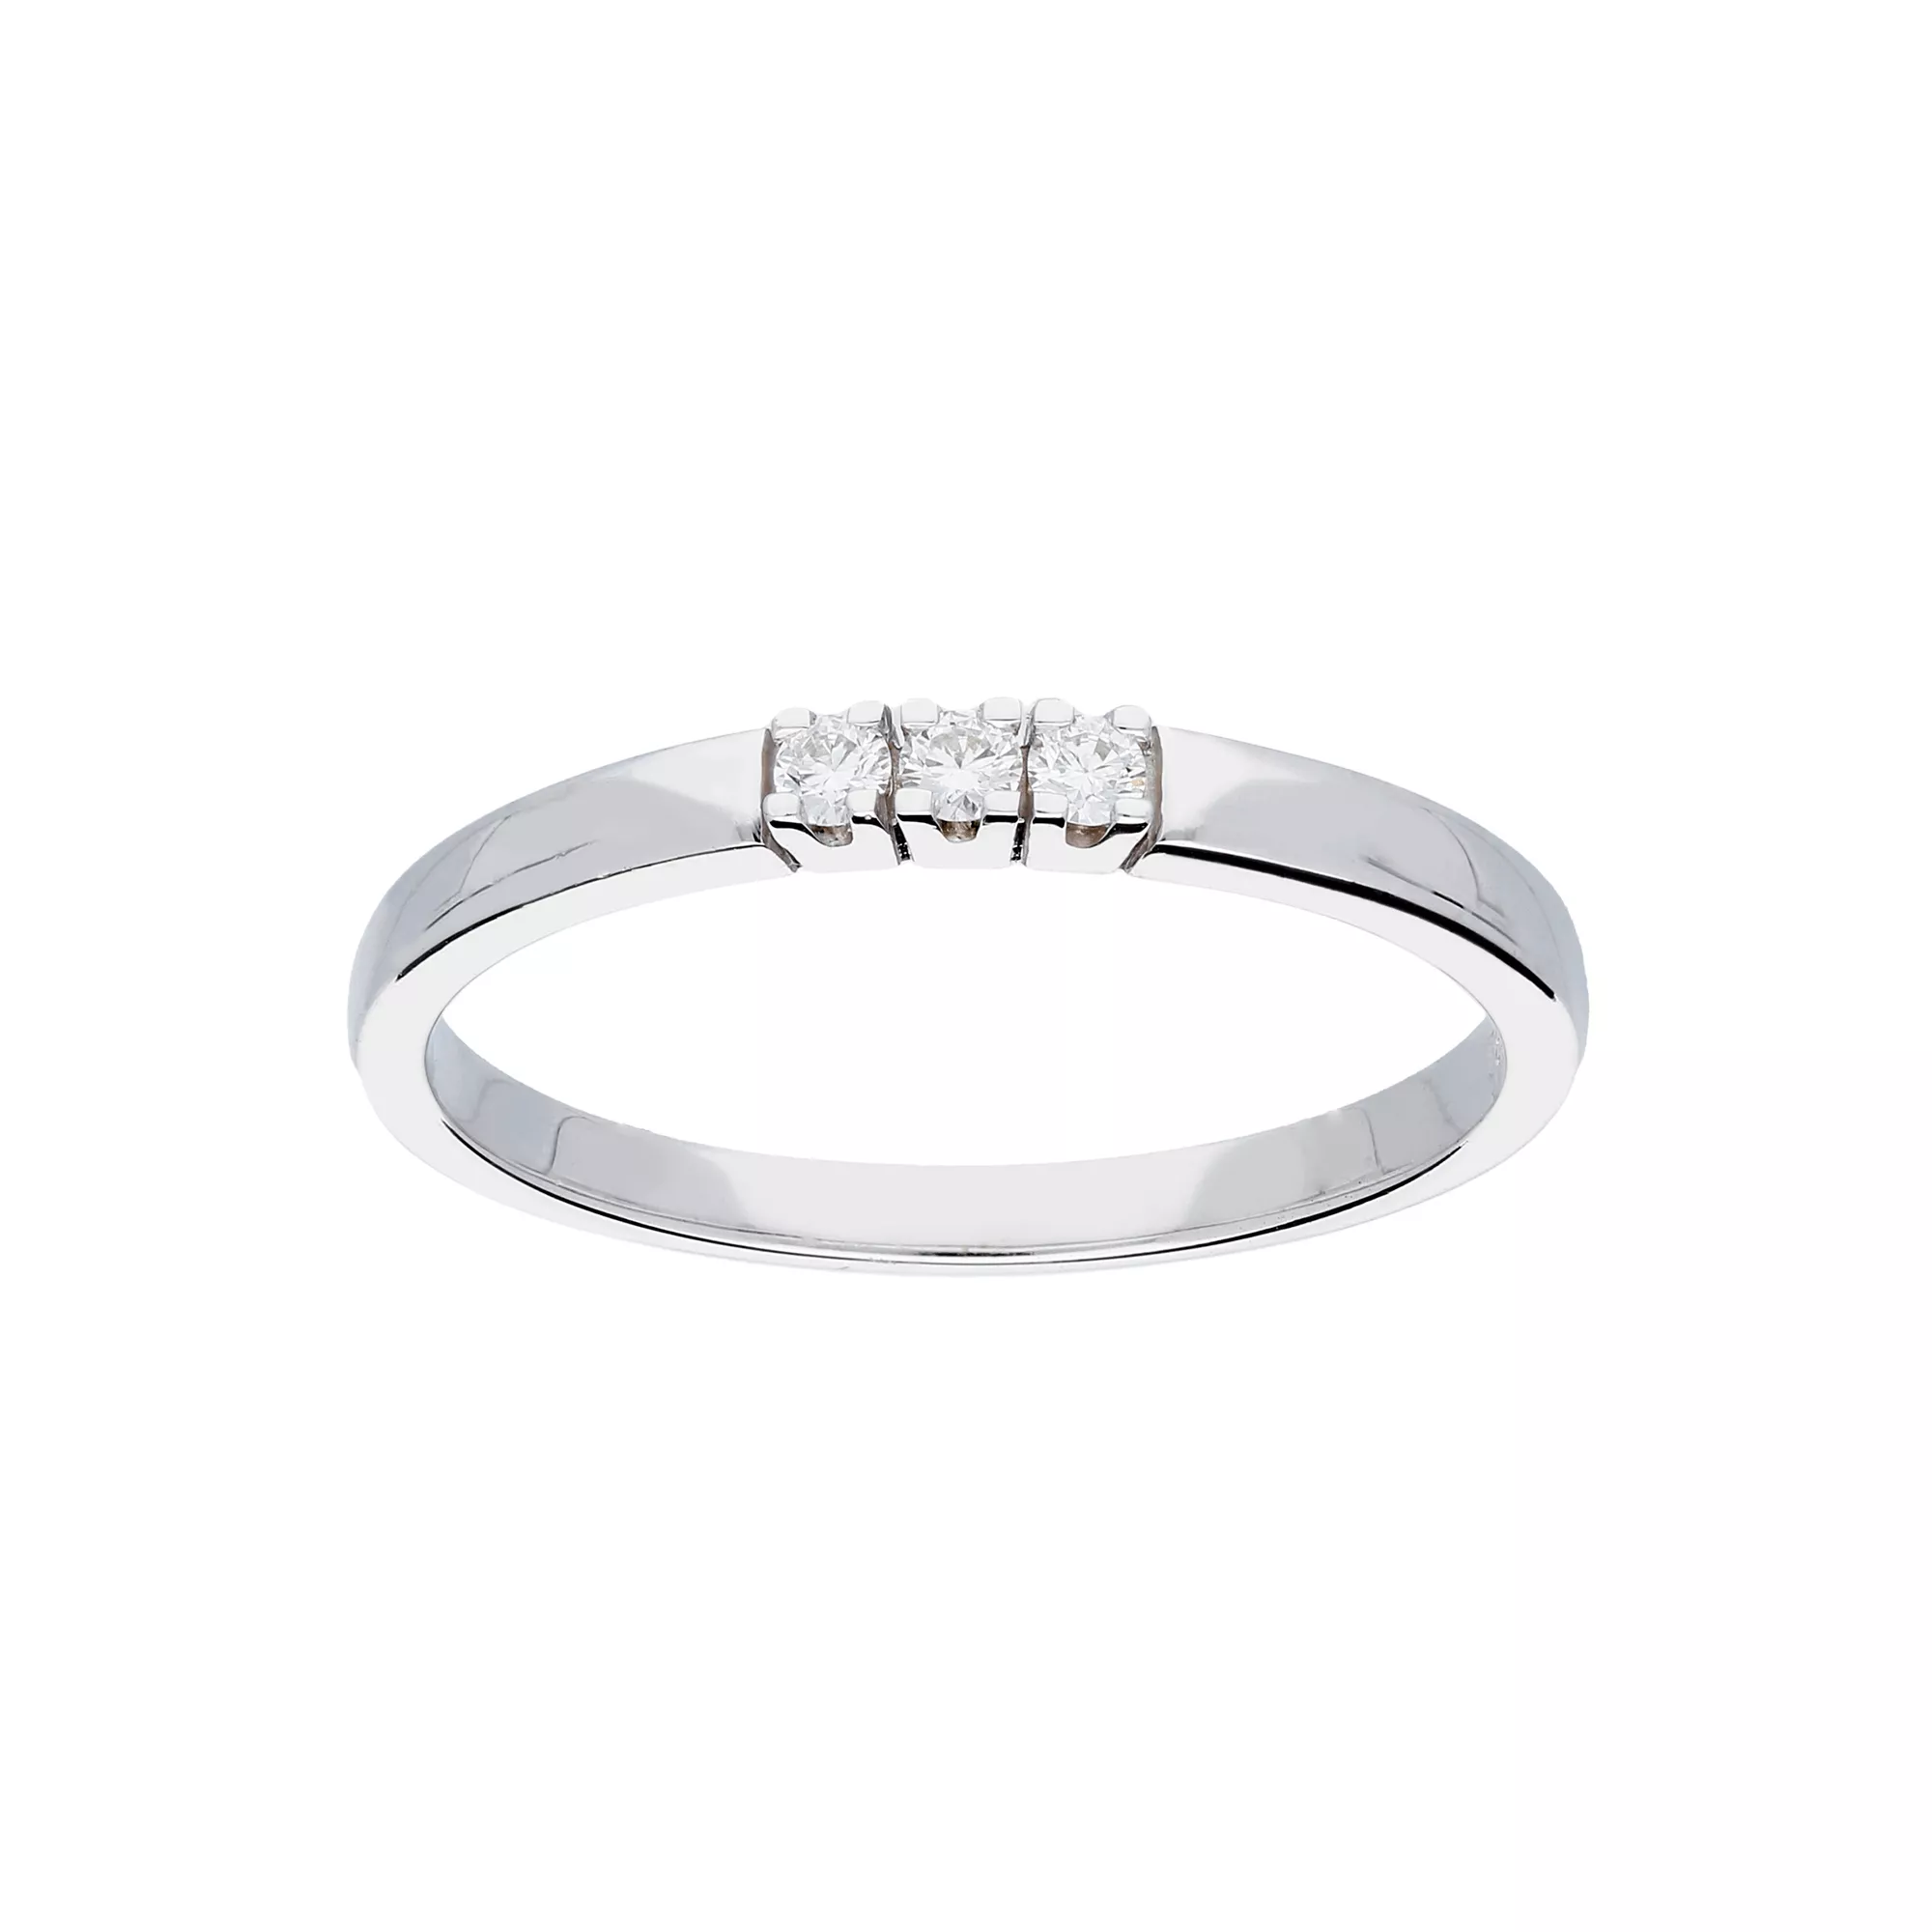 Glow Witgouden Ring - Glanzend Diamant 3- 0.06ct G/si 214.3016.58